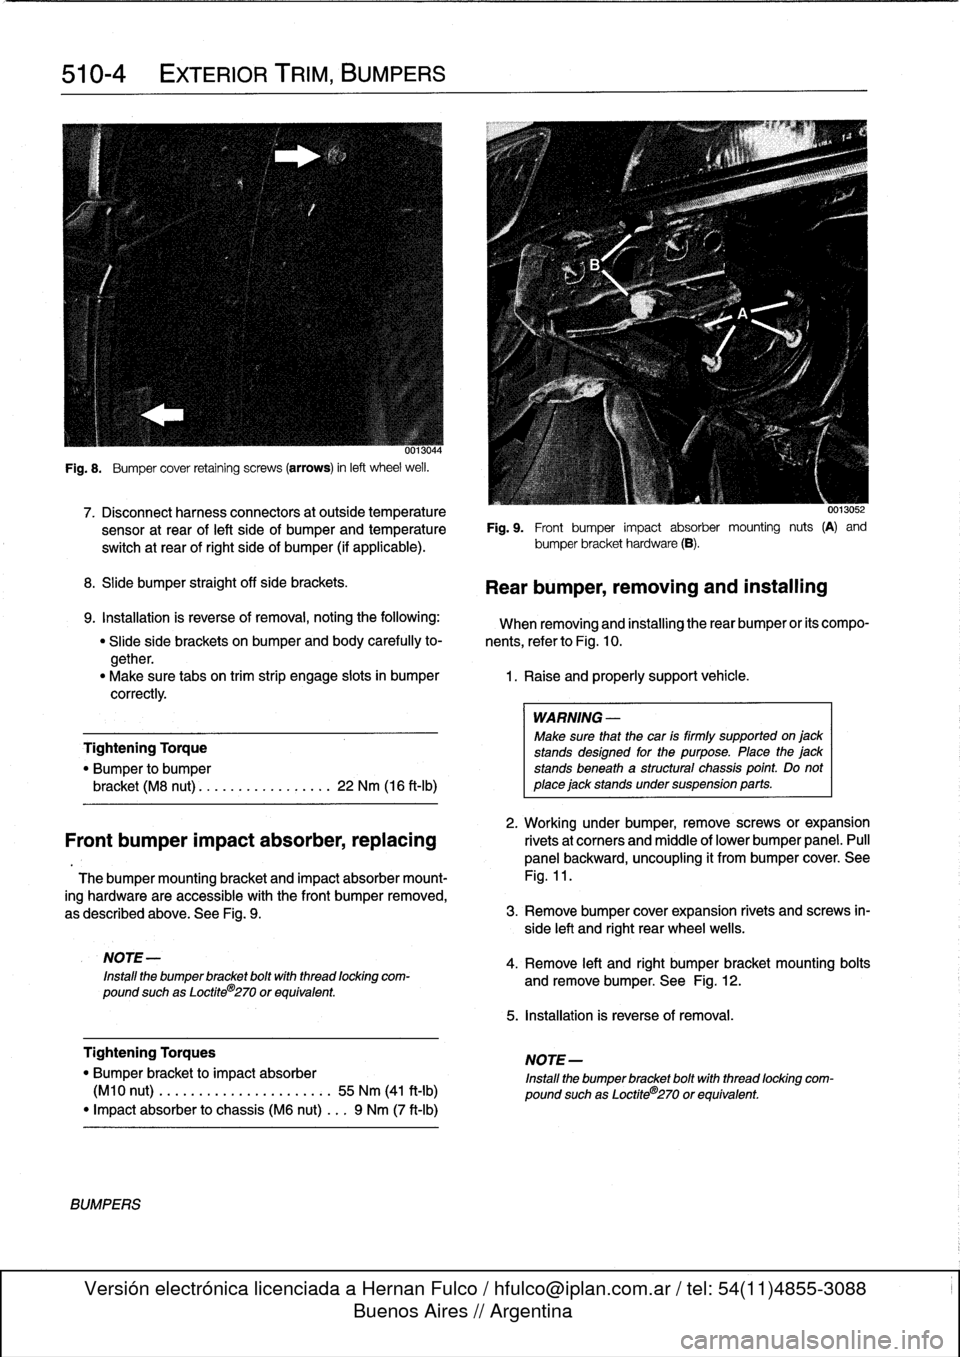 BMW 323i 1993 E36 Service Manual 
510-4

	

EXTERIOR
TRIM,
BUMPERS

Fig
.
8
.

	

Bumper
cover
retaining
screws
(arrows)
in
left
wheel
weil
.

7
.
Disconnect
harnessconnectors
at
outside
temperature

	

0013052

sensor
at
rear
of
lef